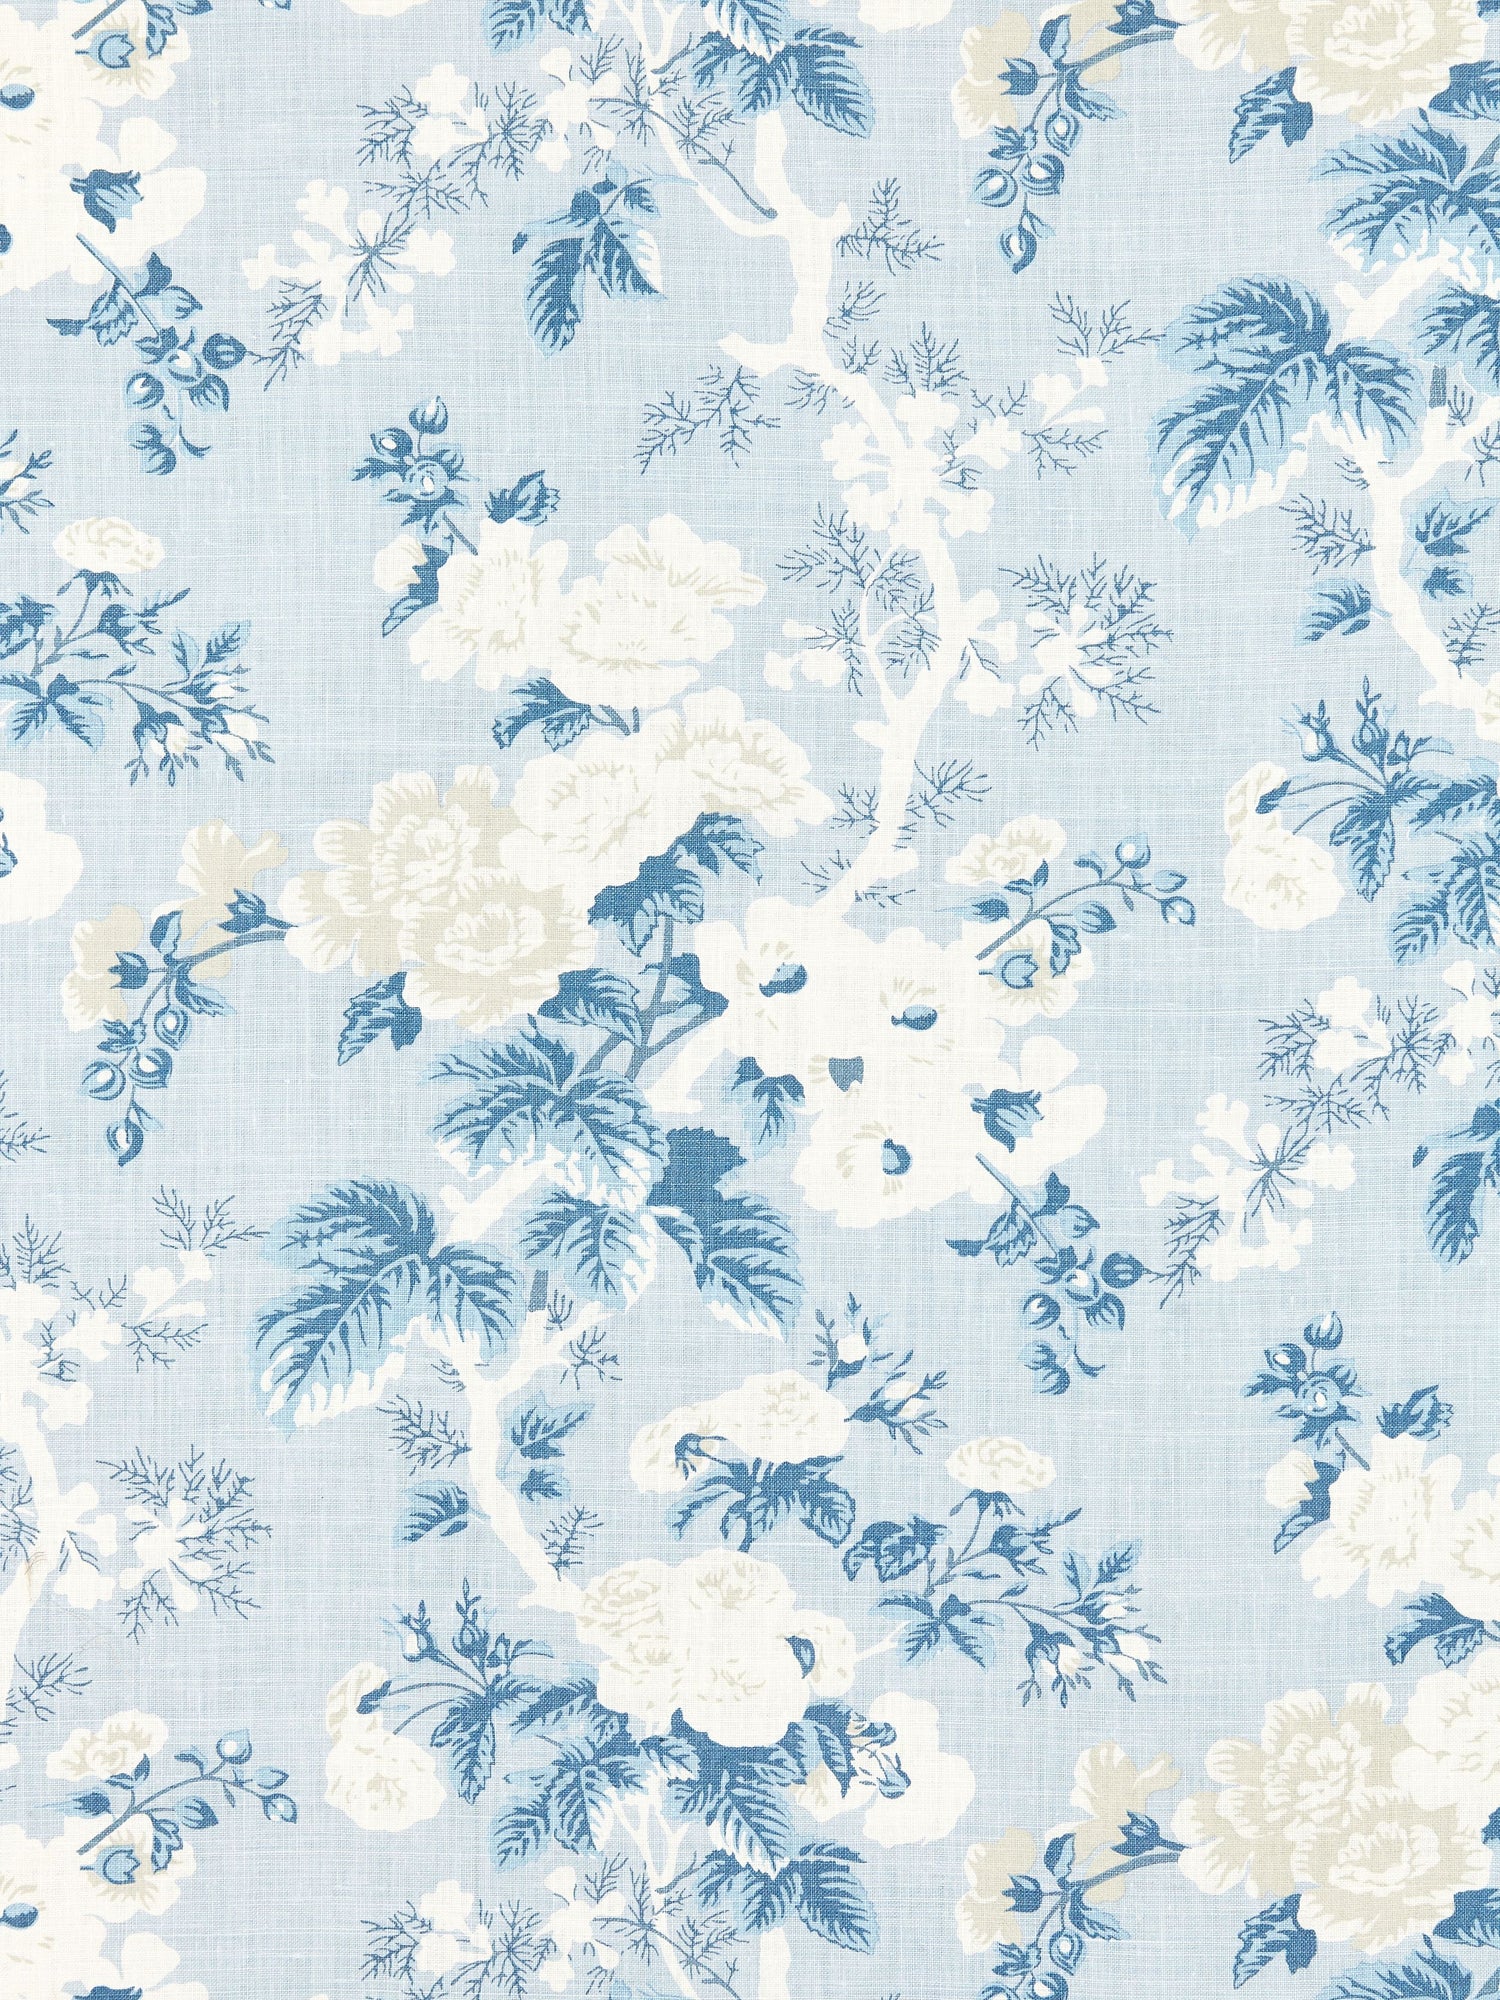 Ascot Linen Print fabric in sky color - pattern number SC 000216602 - by Scalamandre in the Scalamandre Fabrics Book 1 collection